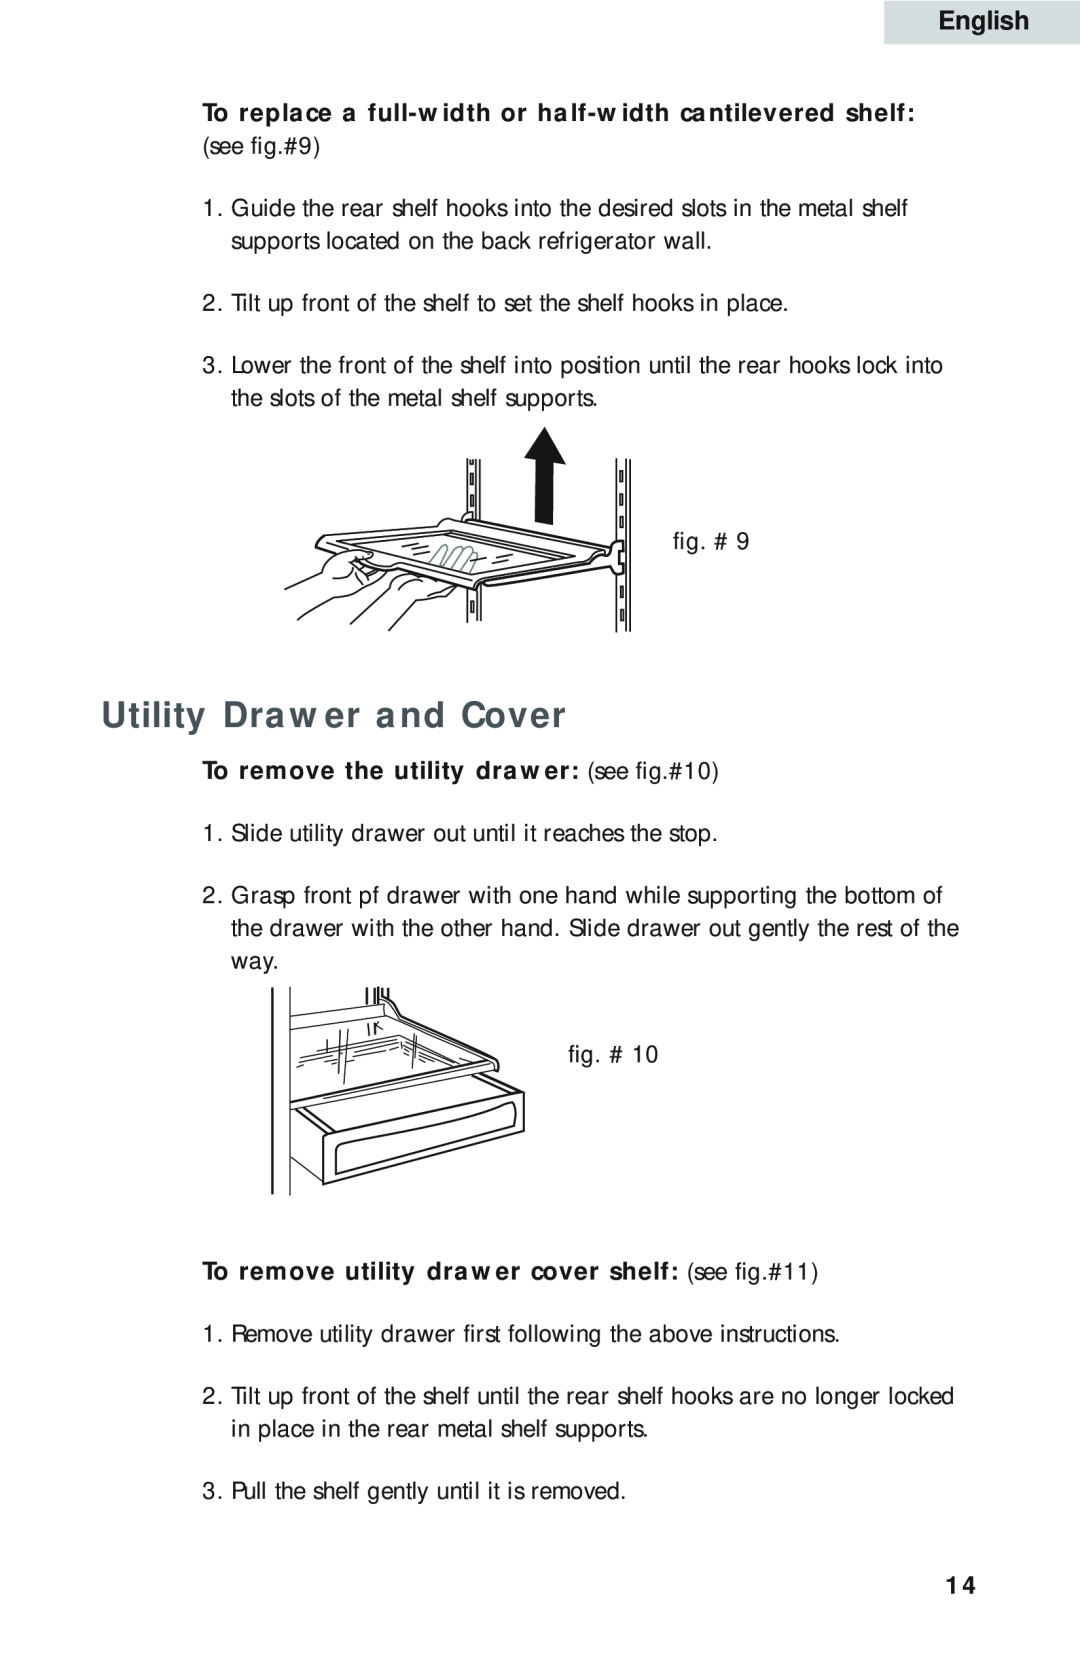 Haier HBQ18, HBP18, HBE18 Utility Drawer and Cover, To replace a full-width or half-width cantilevered shelf see fig.#9 